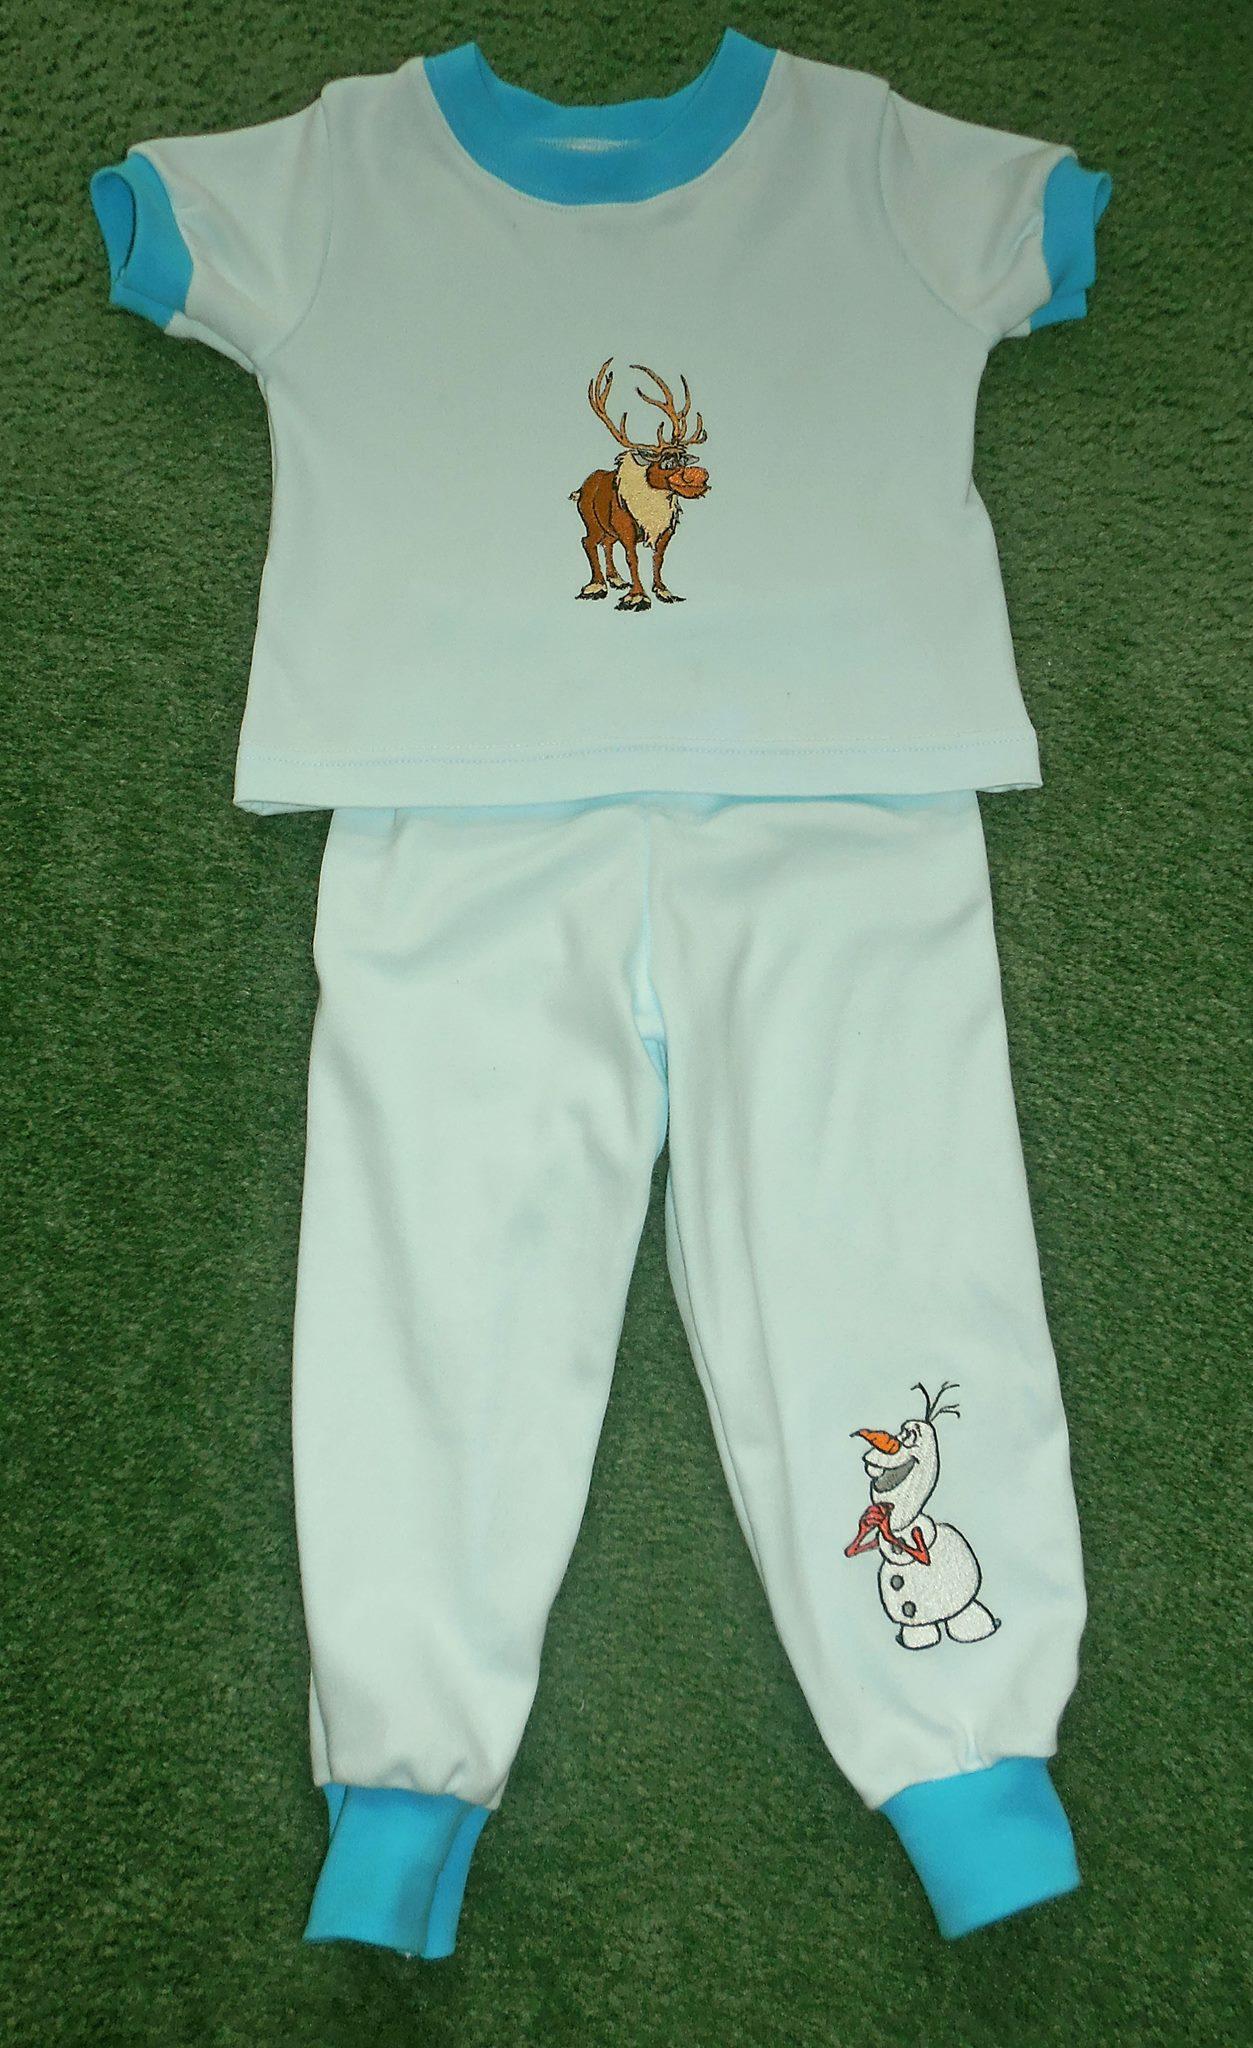 Kids pajamas with Sven the Reindeer and Olaf the Snowman